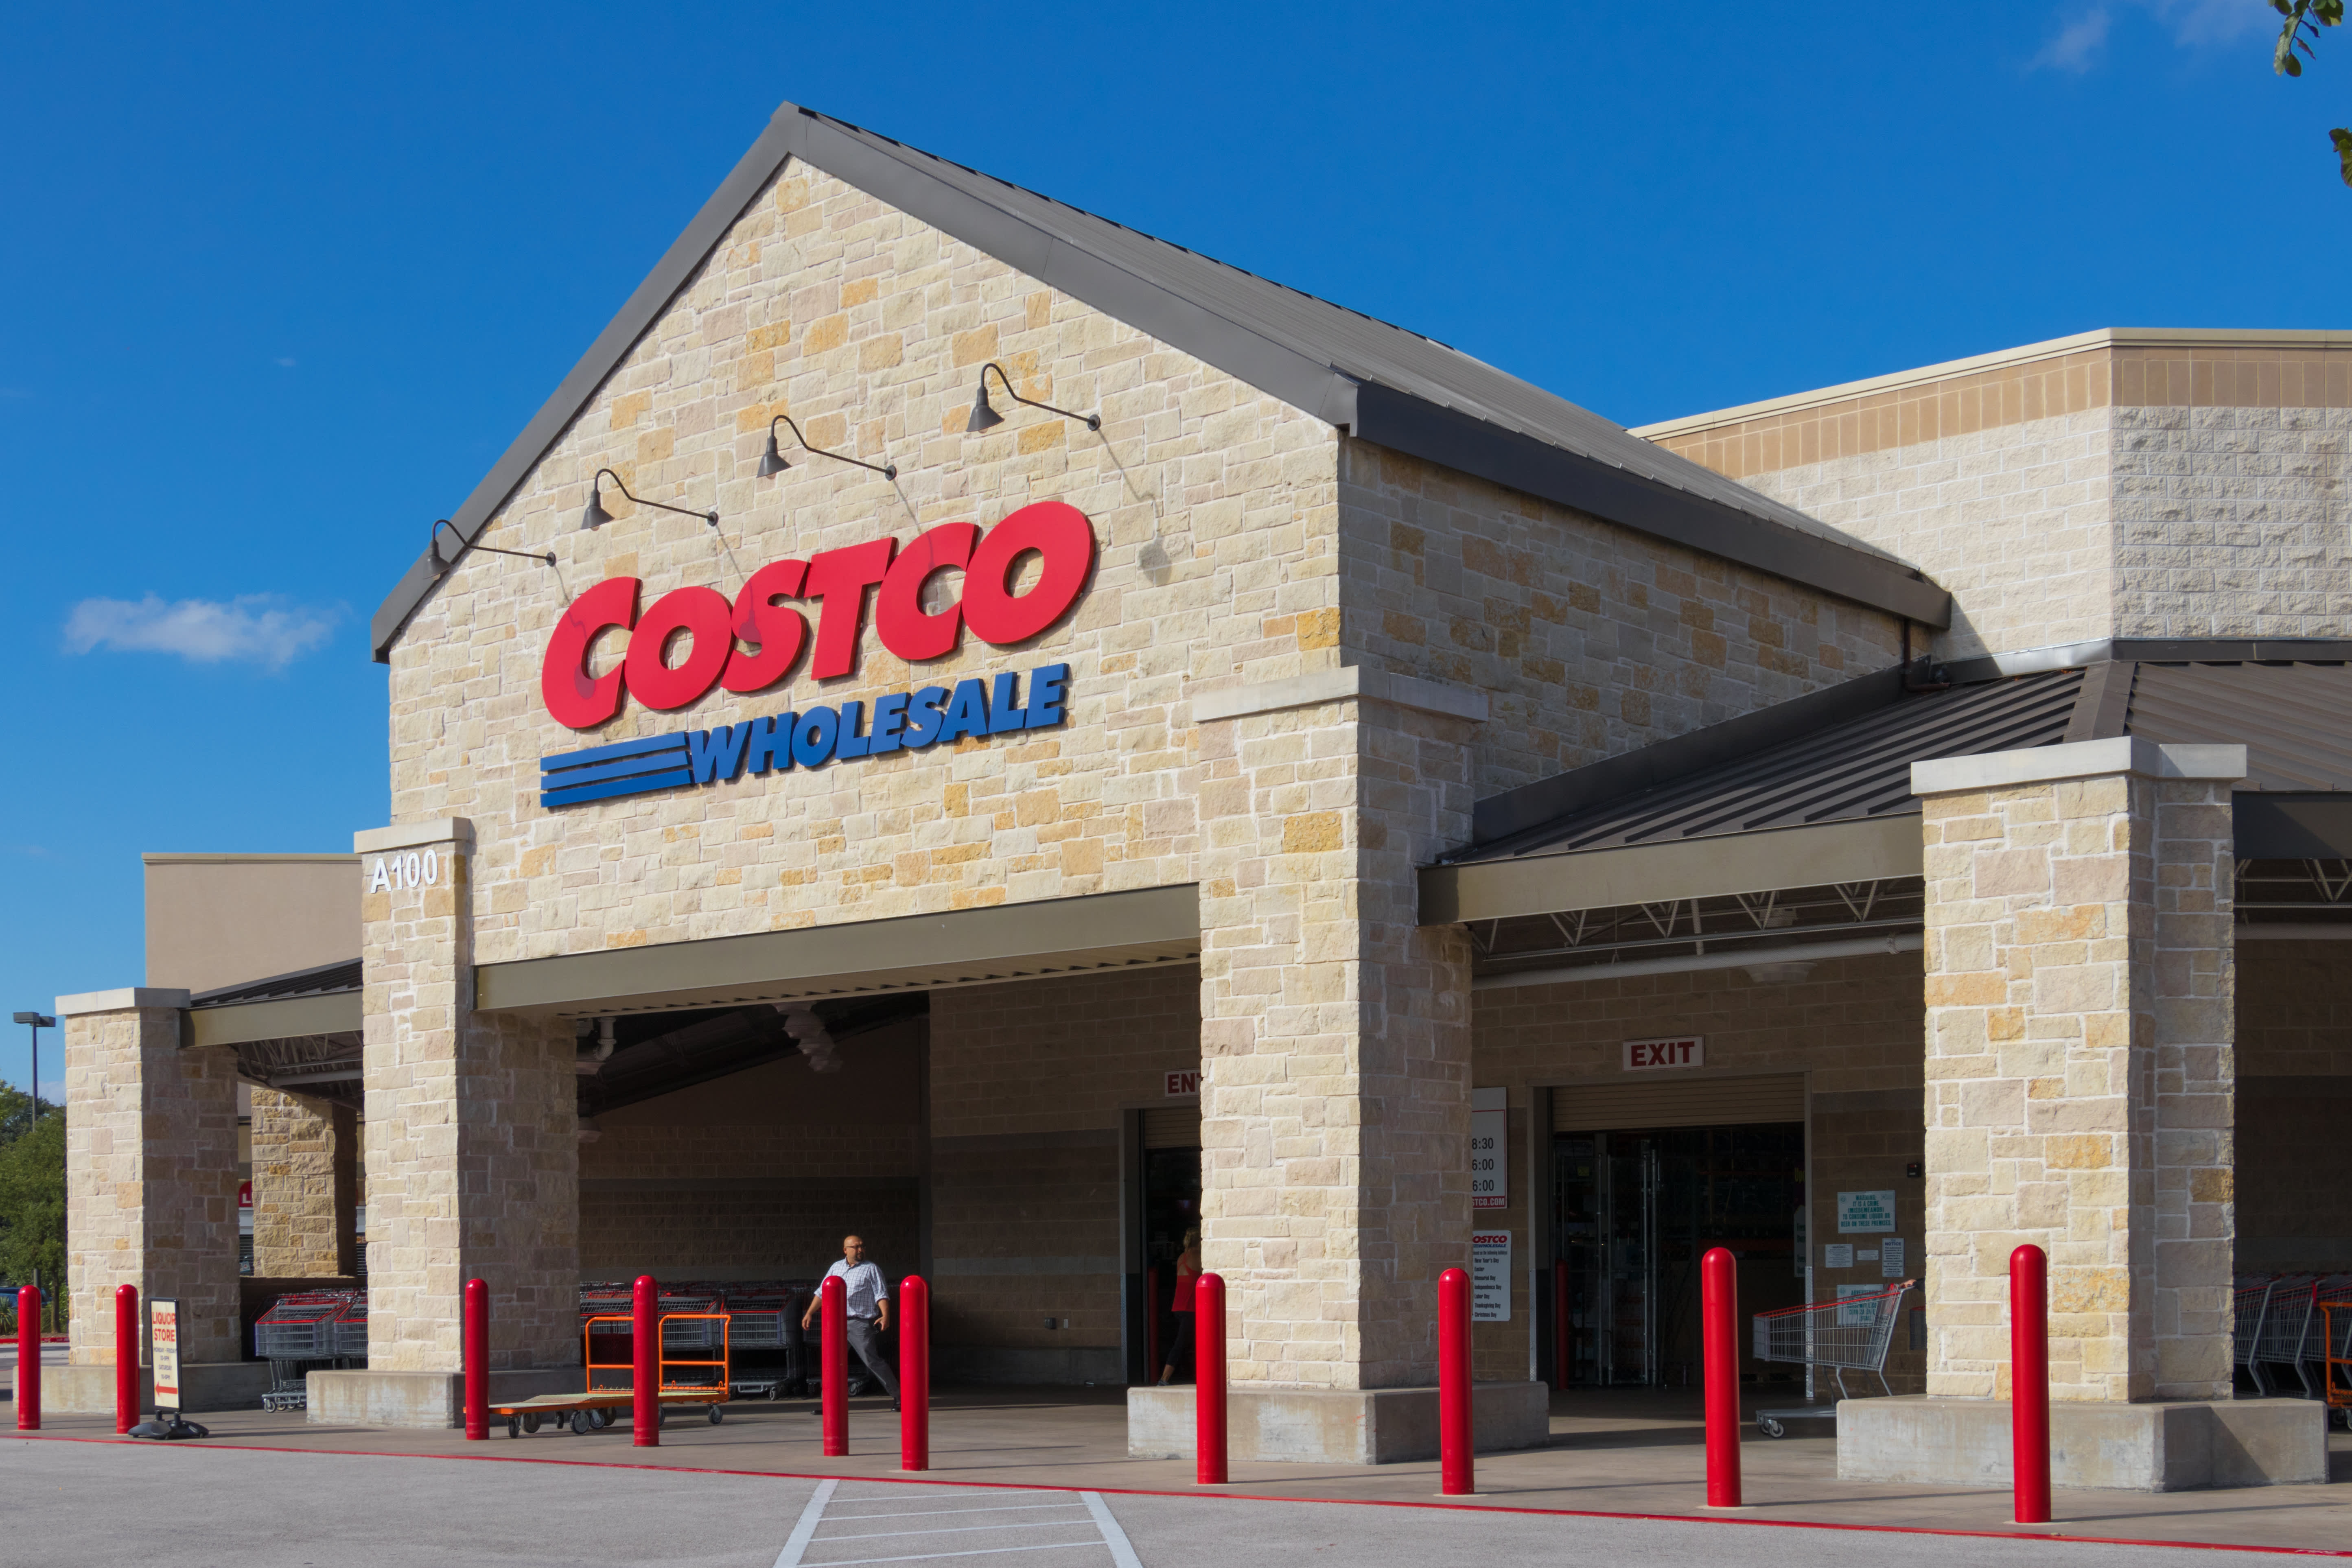 The 5 Best Products from Costco, According to Employees